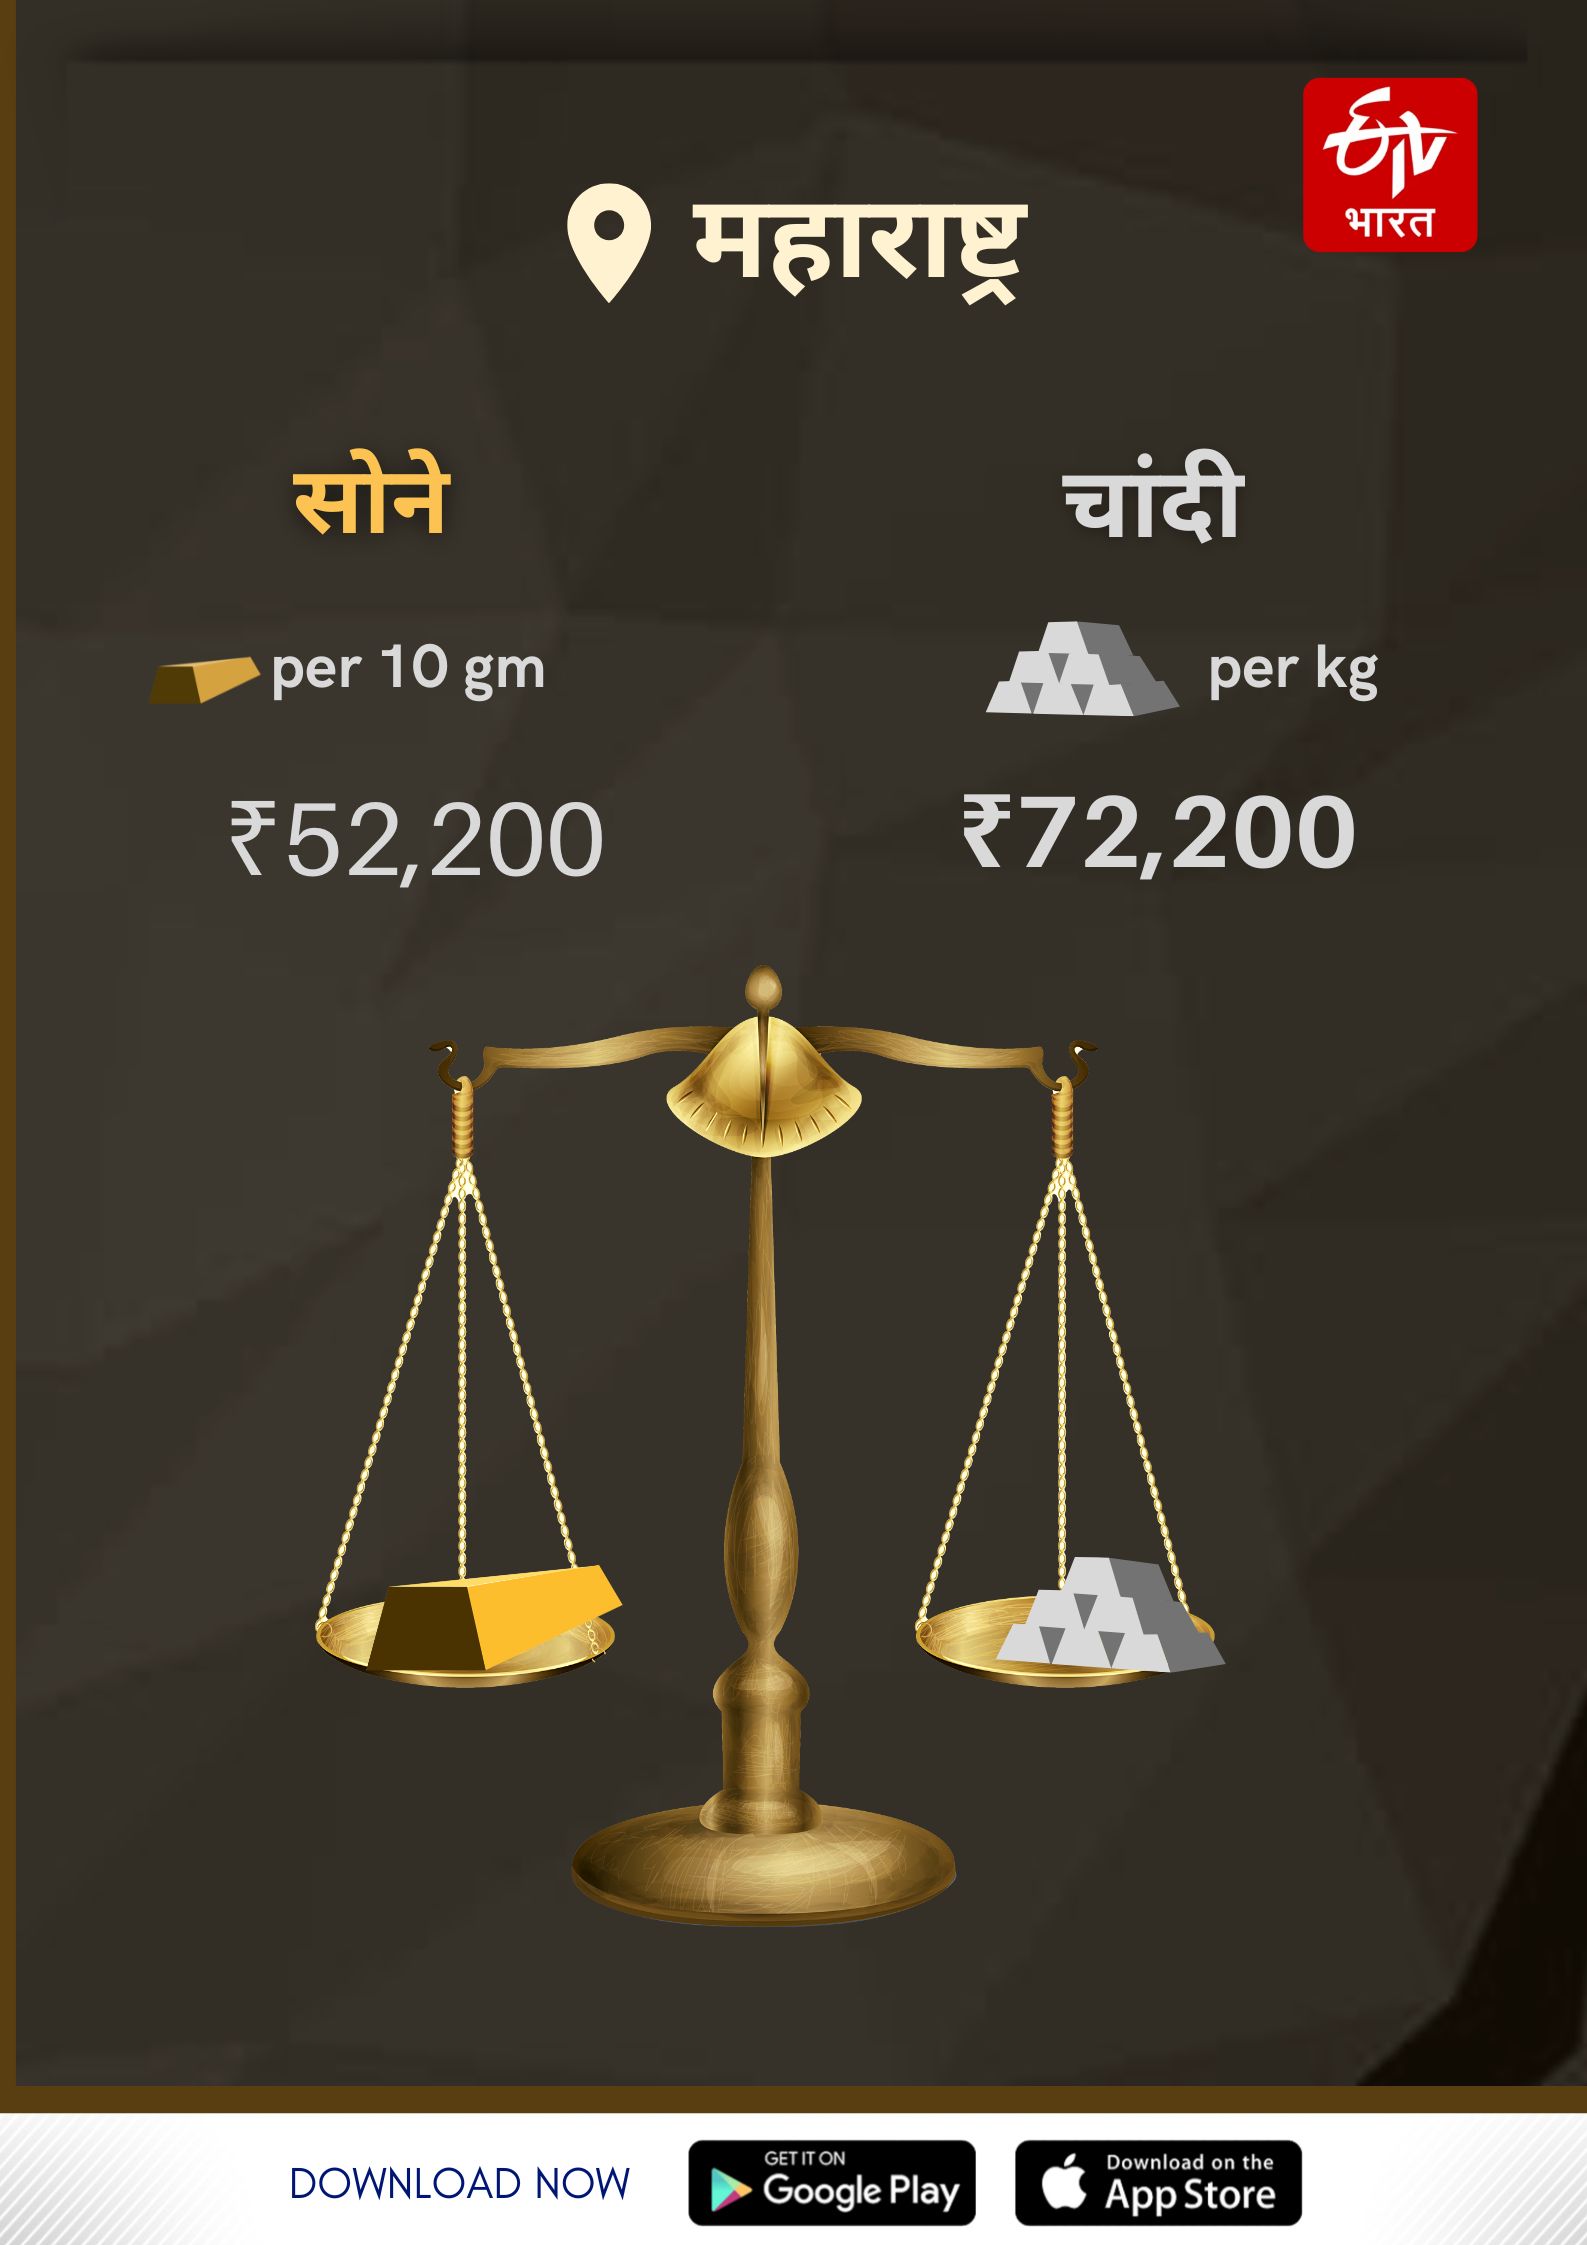 Gold Silver Rates